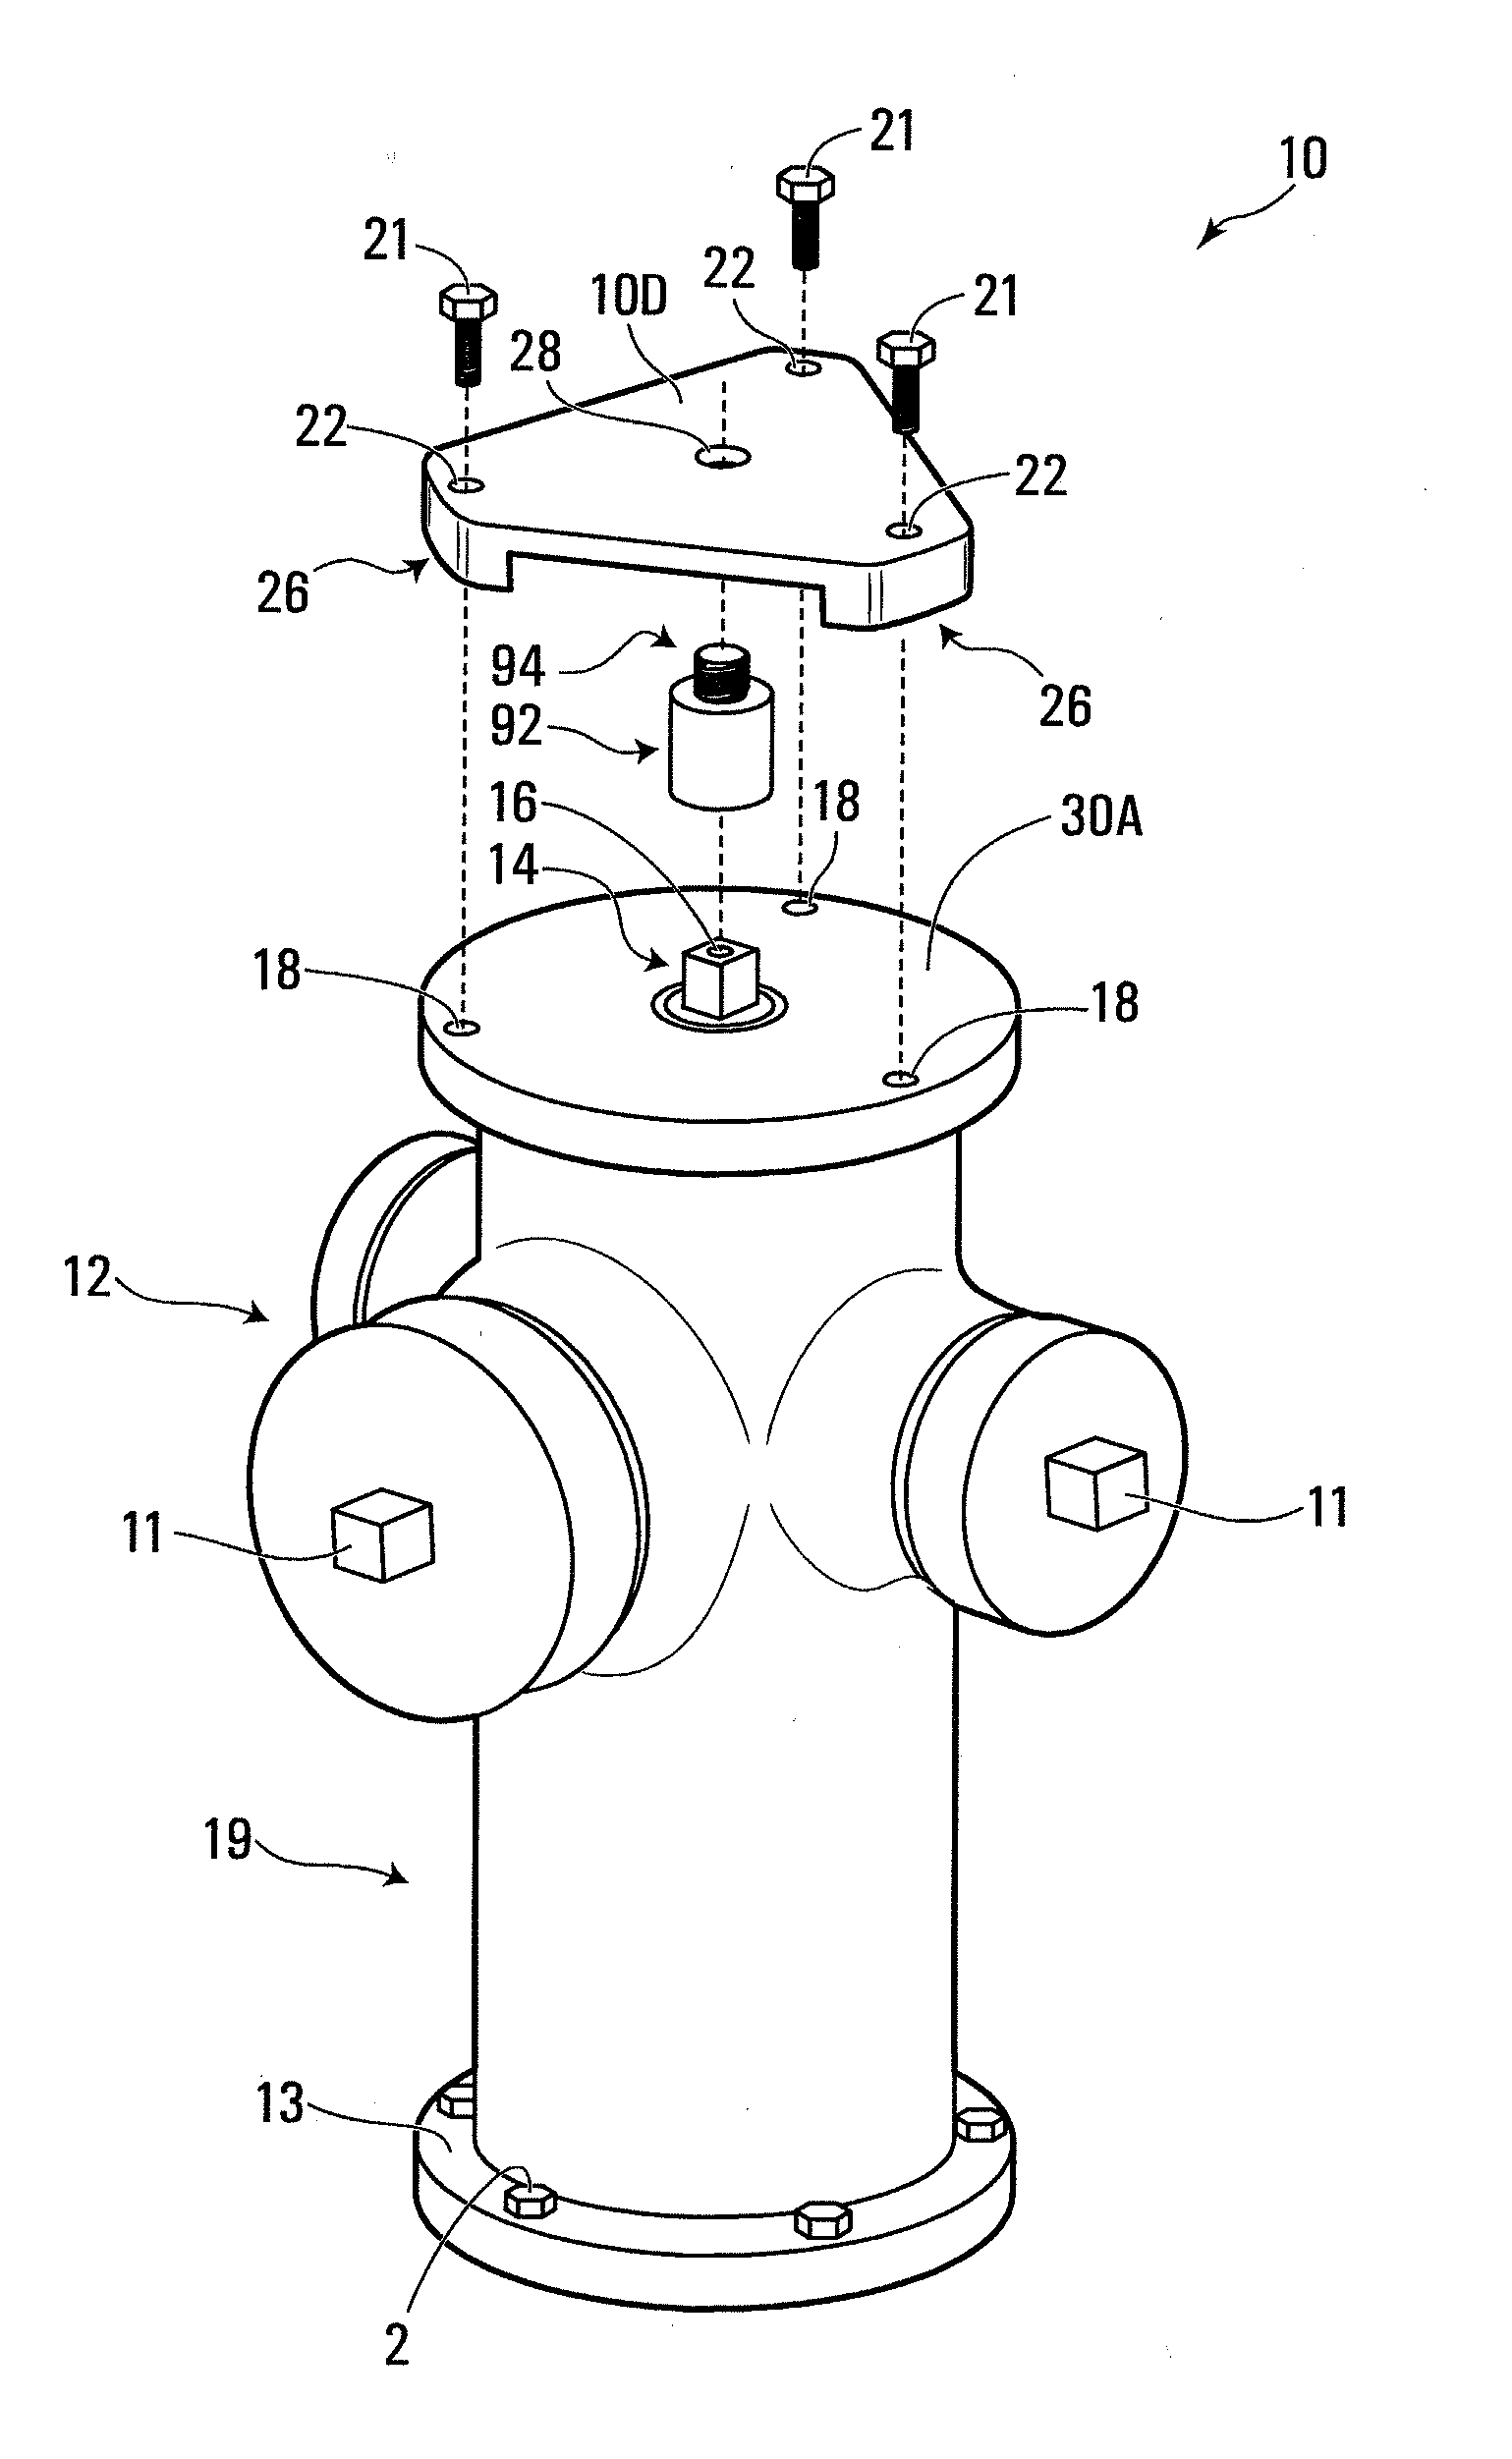 Apparatus and methods for surveying with a hydrant monument